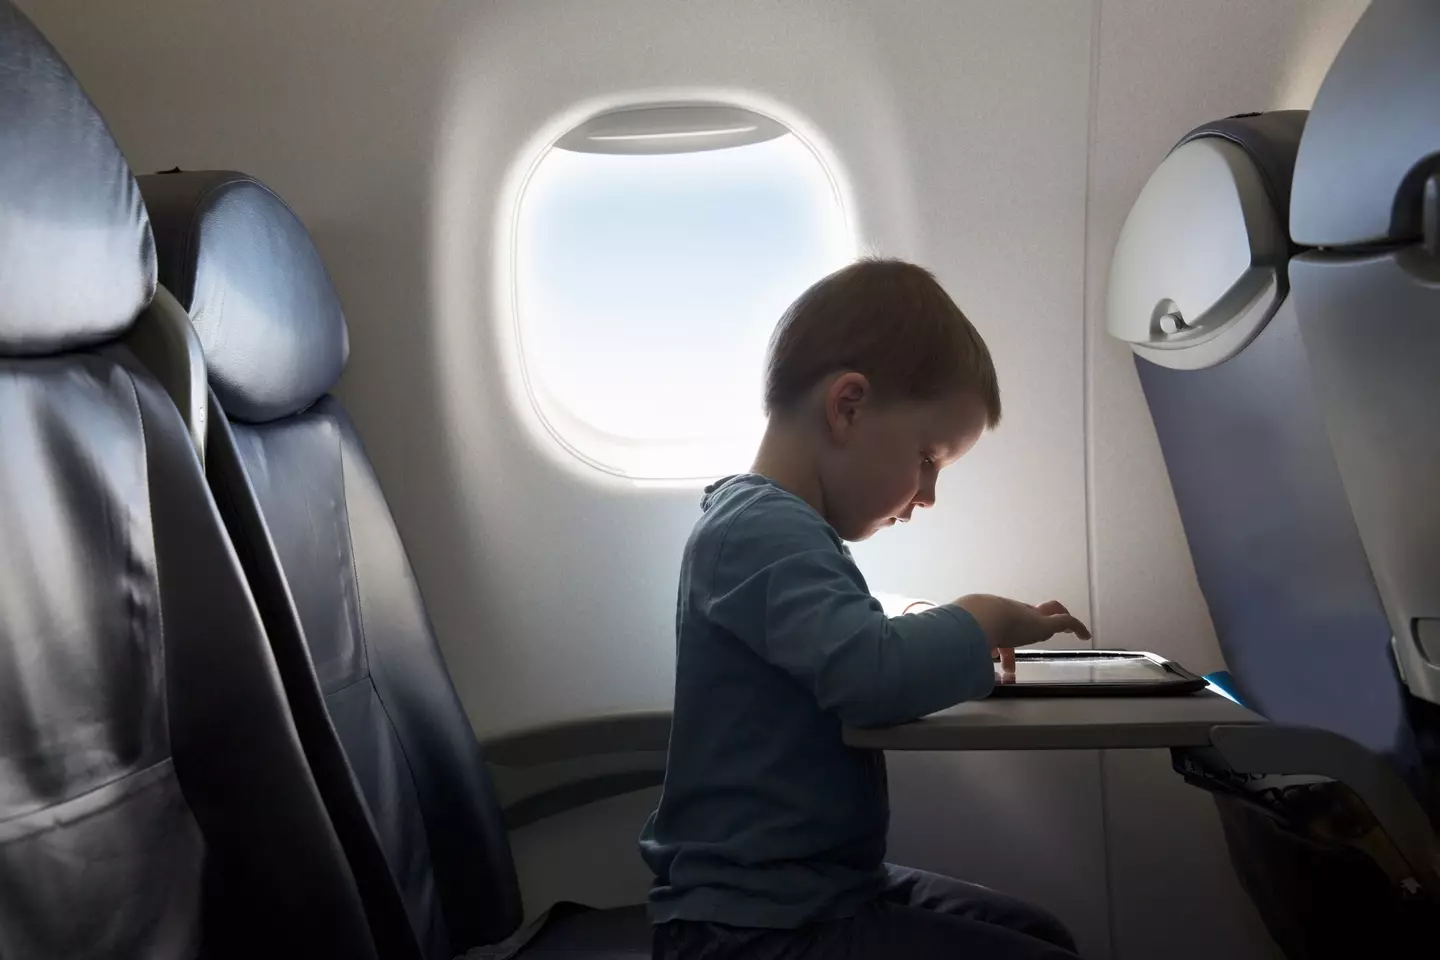 The six-year-old was put on the wrong plane (stock image).